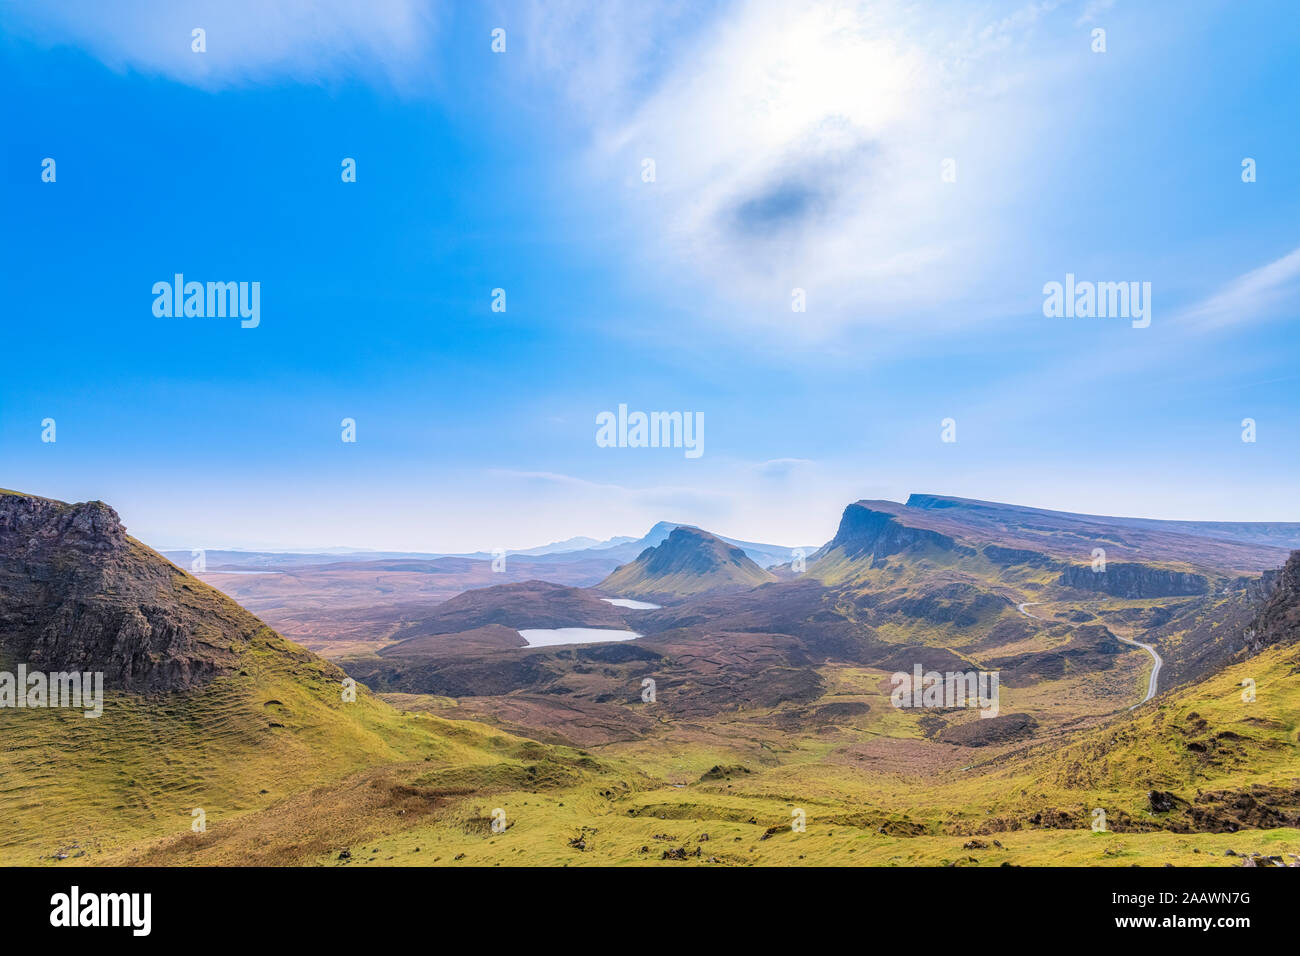 Scenic view of landscape against sky seen from Quiraing, Isle of Skye, Highlands, Scotland, UK Stock Photo